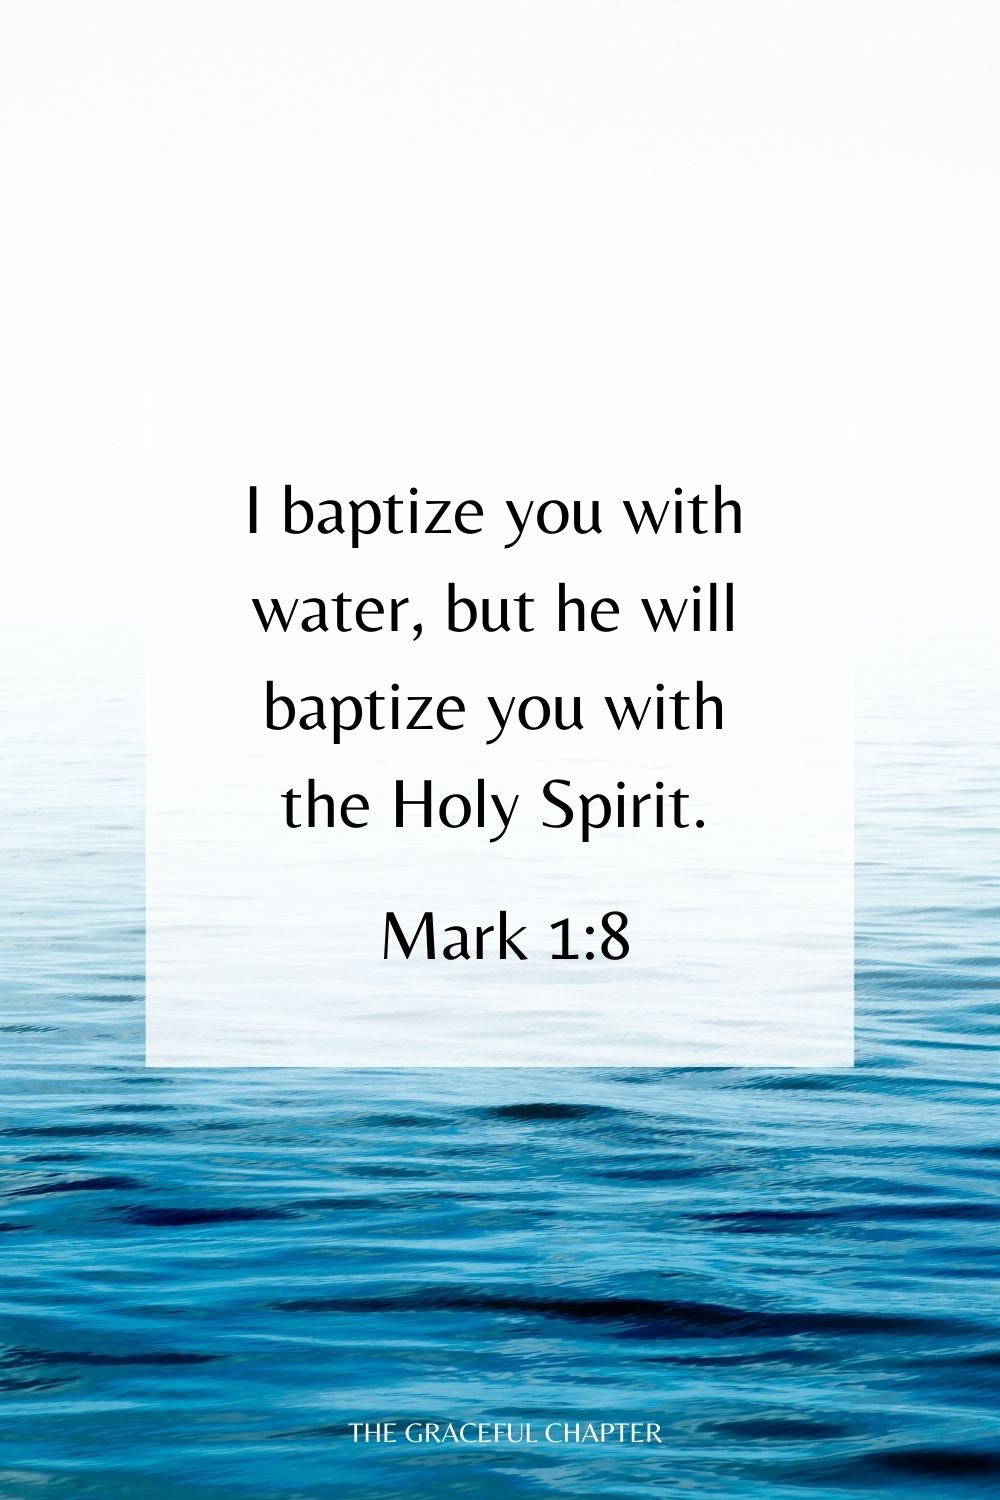 I baptize you with water, but he will baptize you with the Holy Spirit. Mark 1:8